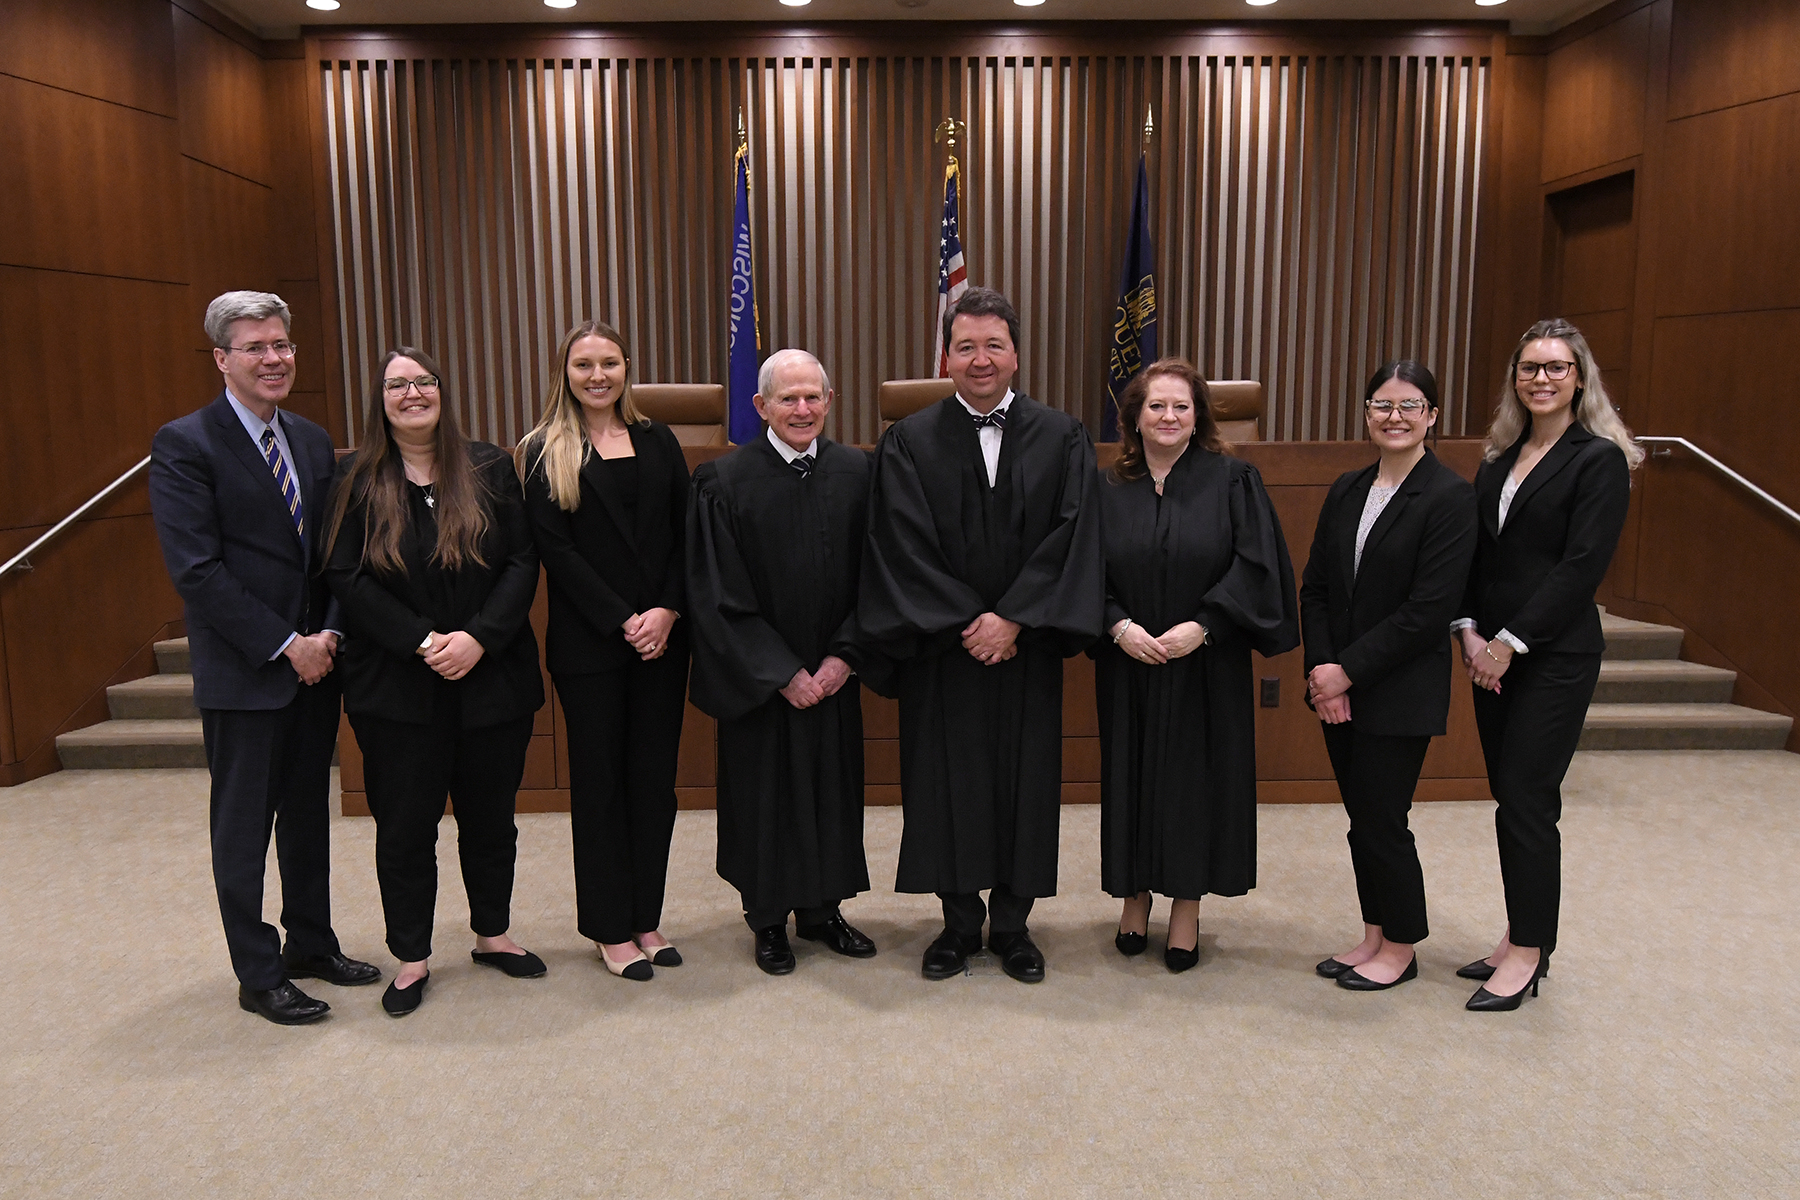 8 people standing next to each other, all professionally dressed. Four are young women, three are judges, and one is the dean of the law school.